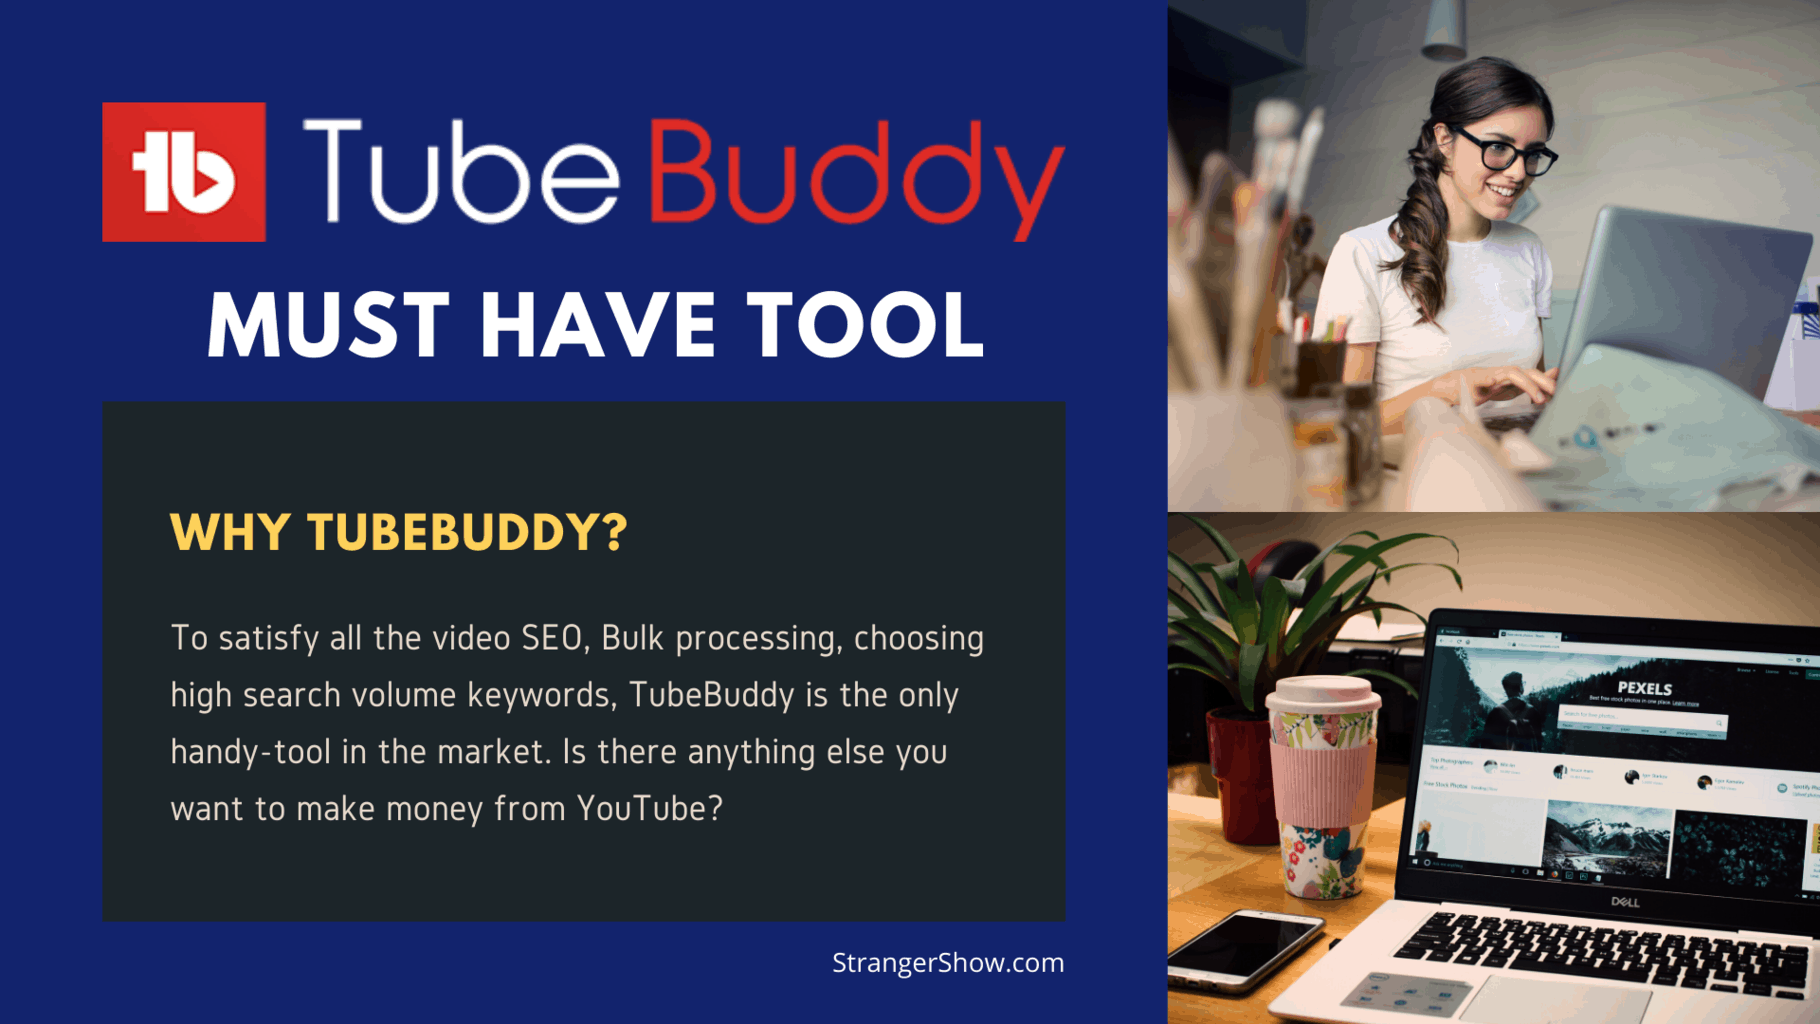 TubeBuddy, a must have YouTube tool